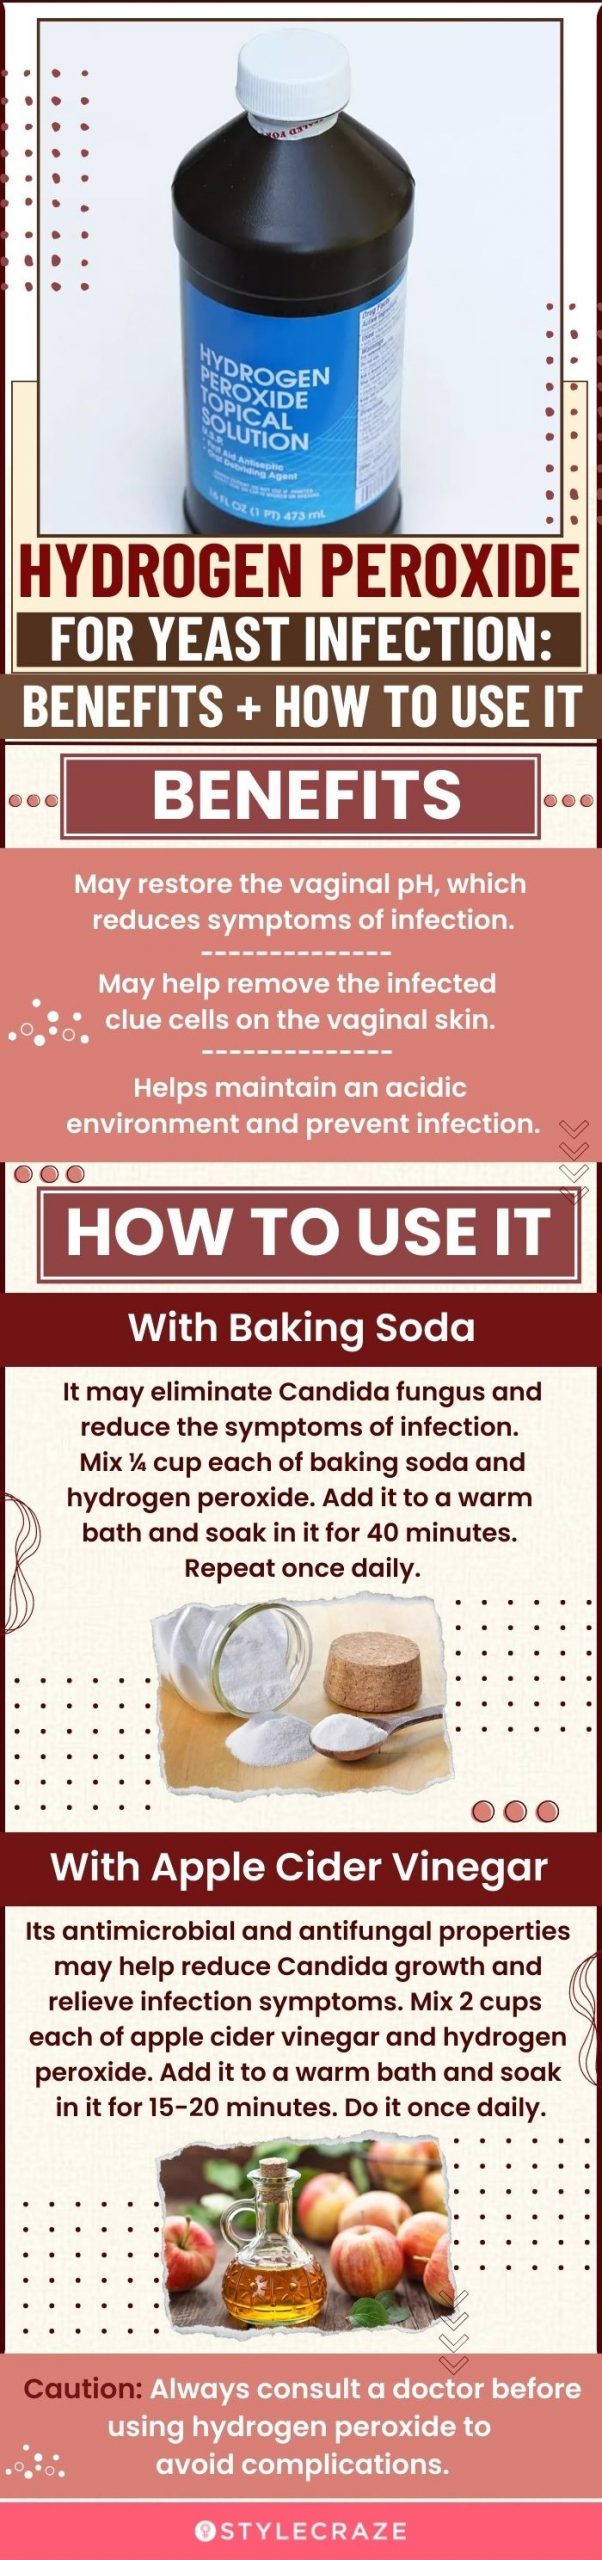 hydrogen peroxide for yeast infection benefits how to use it (infographic)